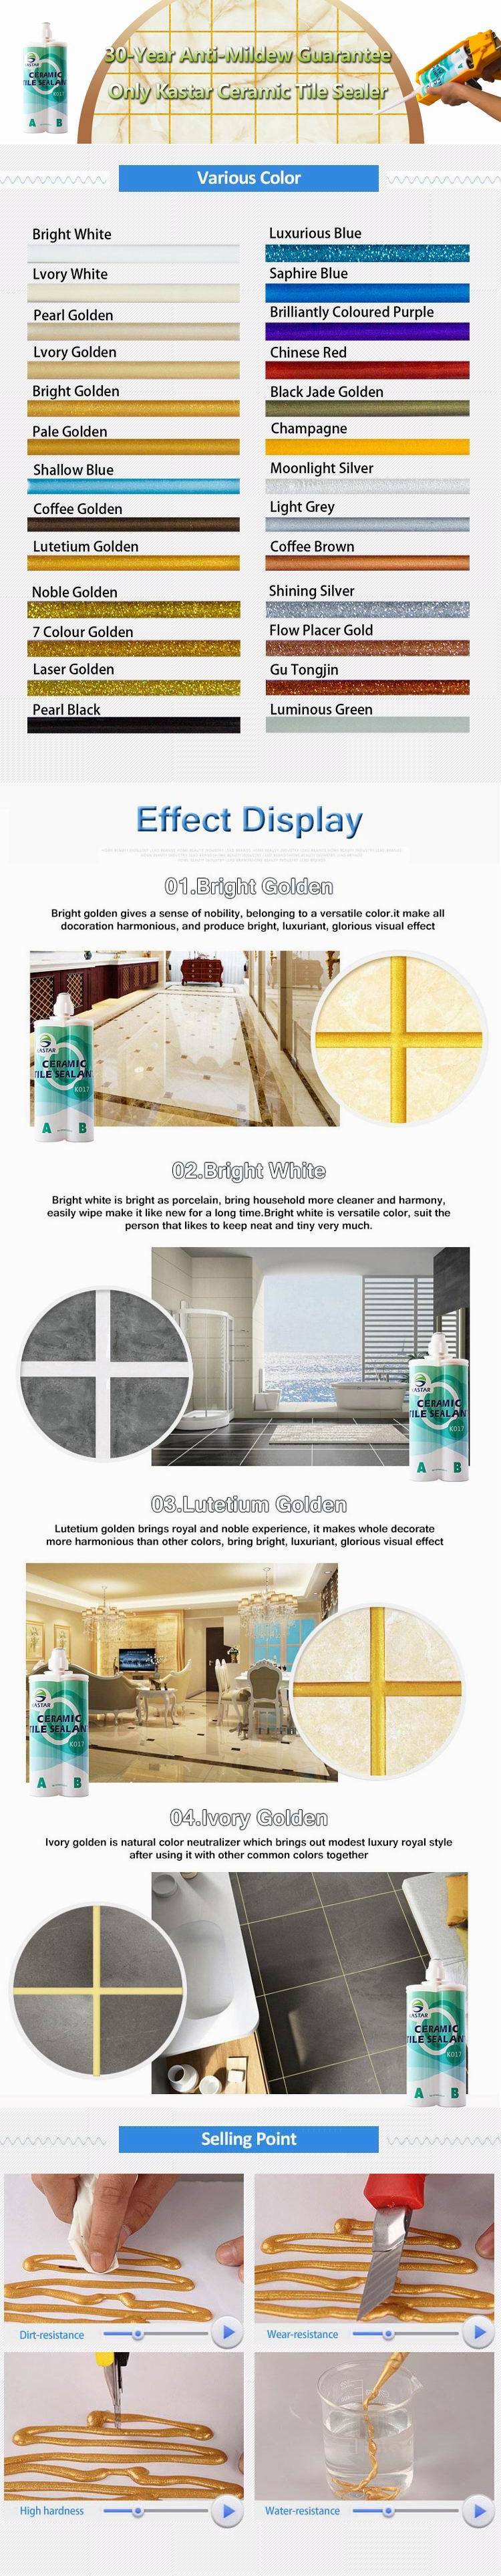 Hot Sale Ready Mixed Floor Tile Crack Sealant and Marble Mastic Adhesive